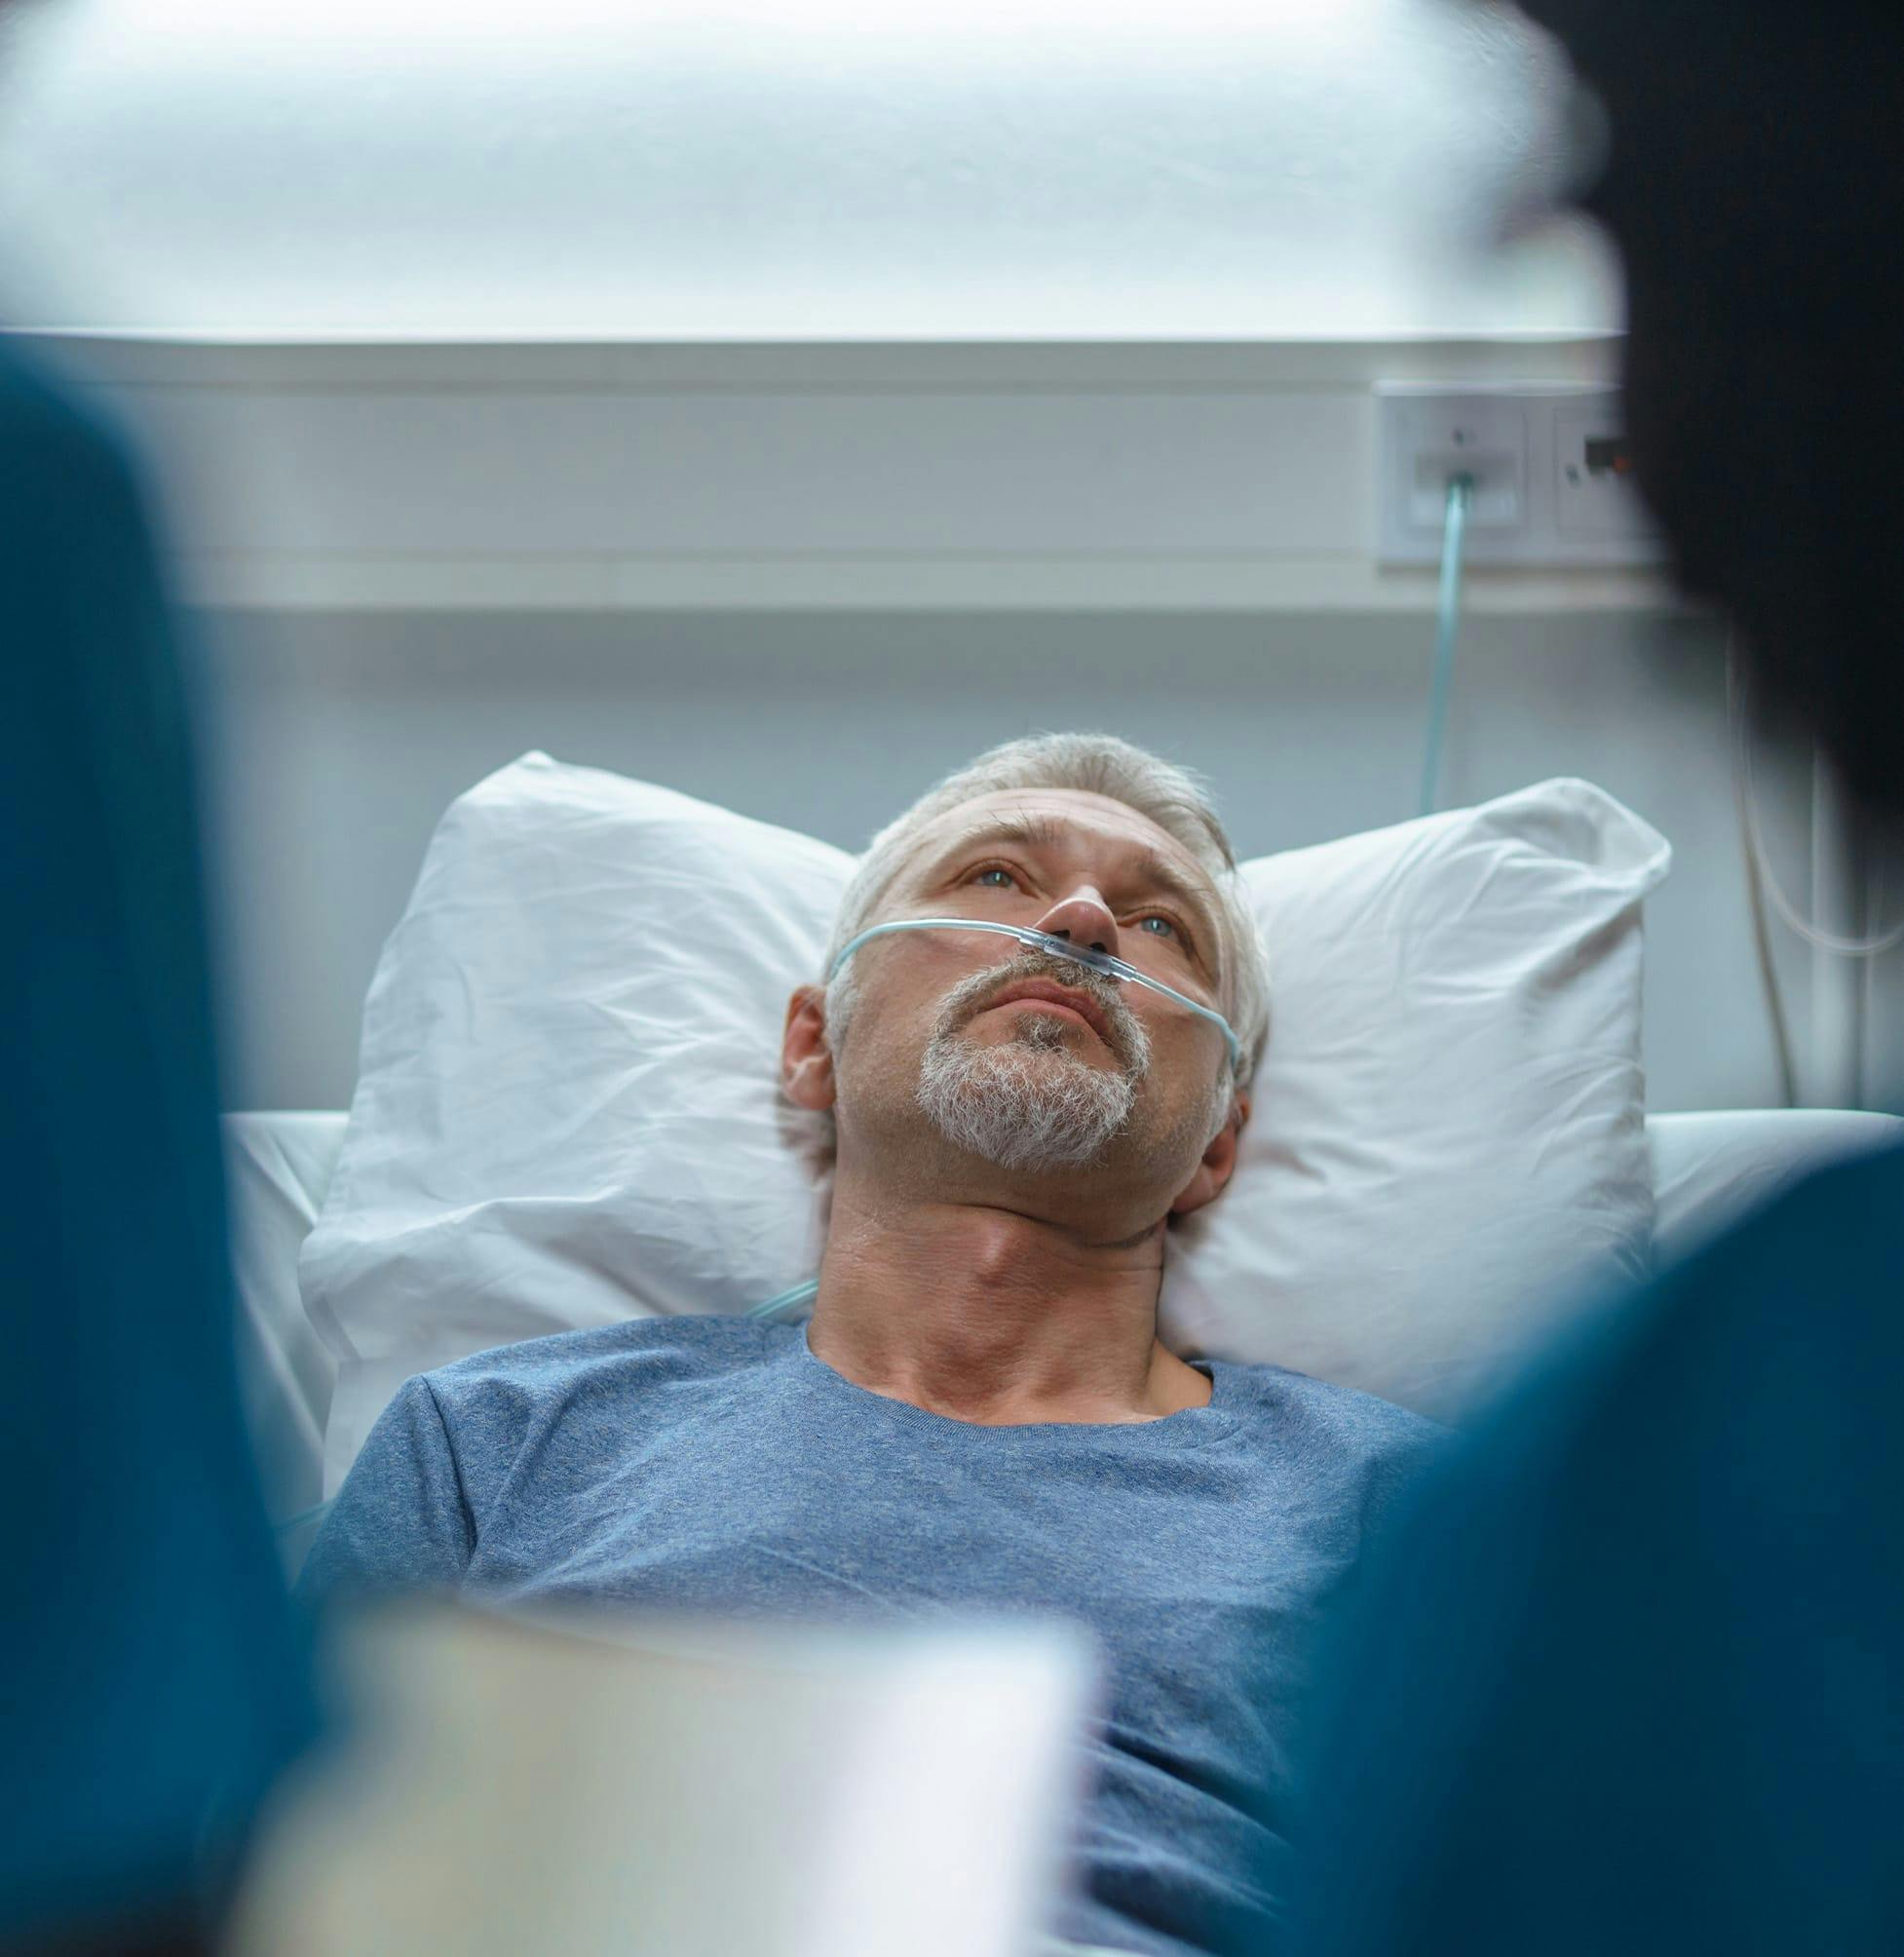 Man looking forlorn in a hospital bed